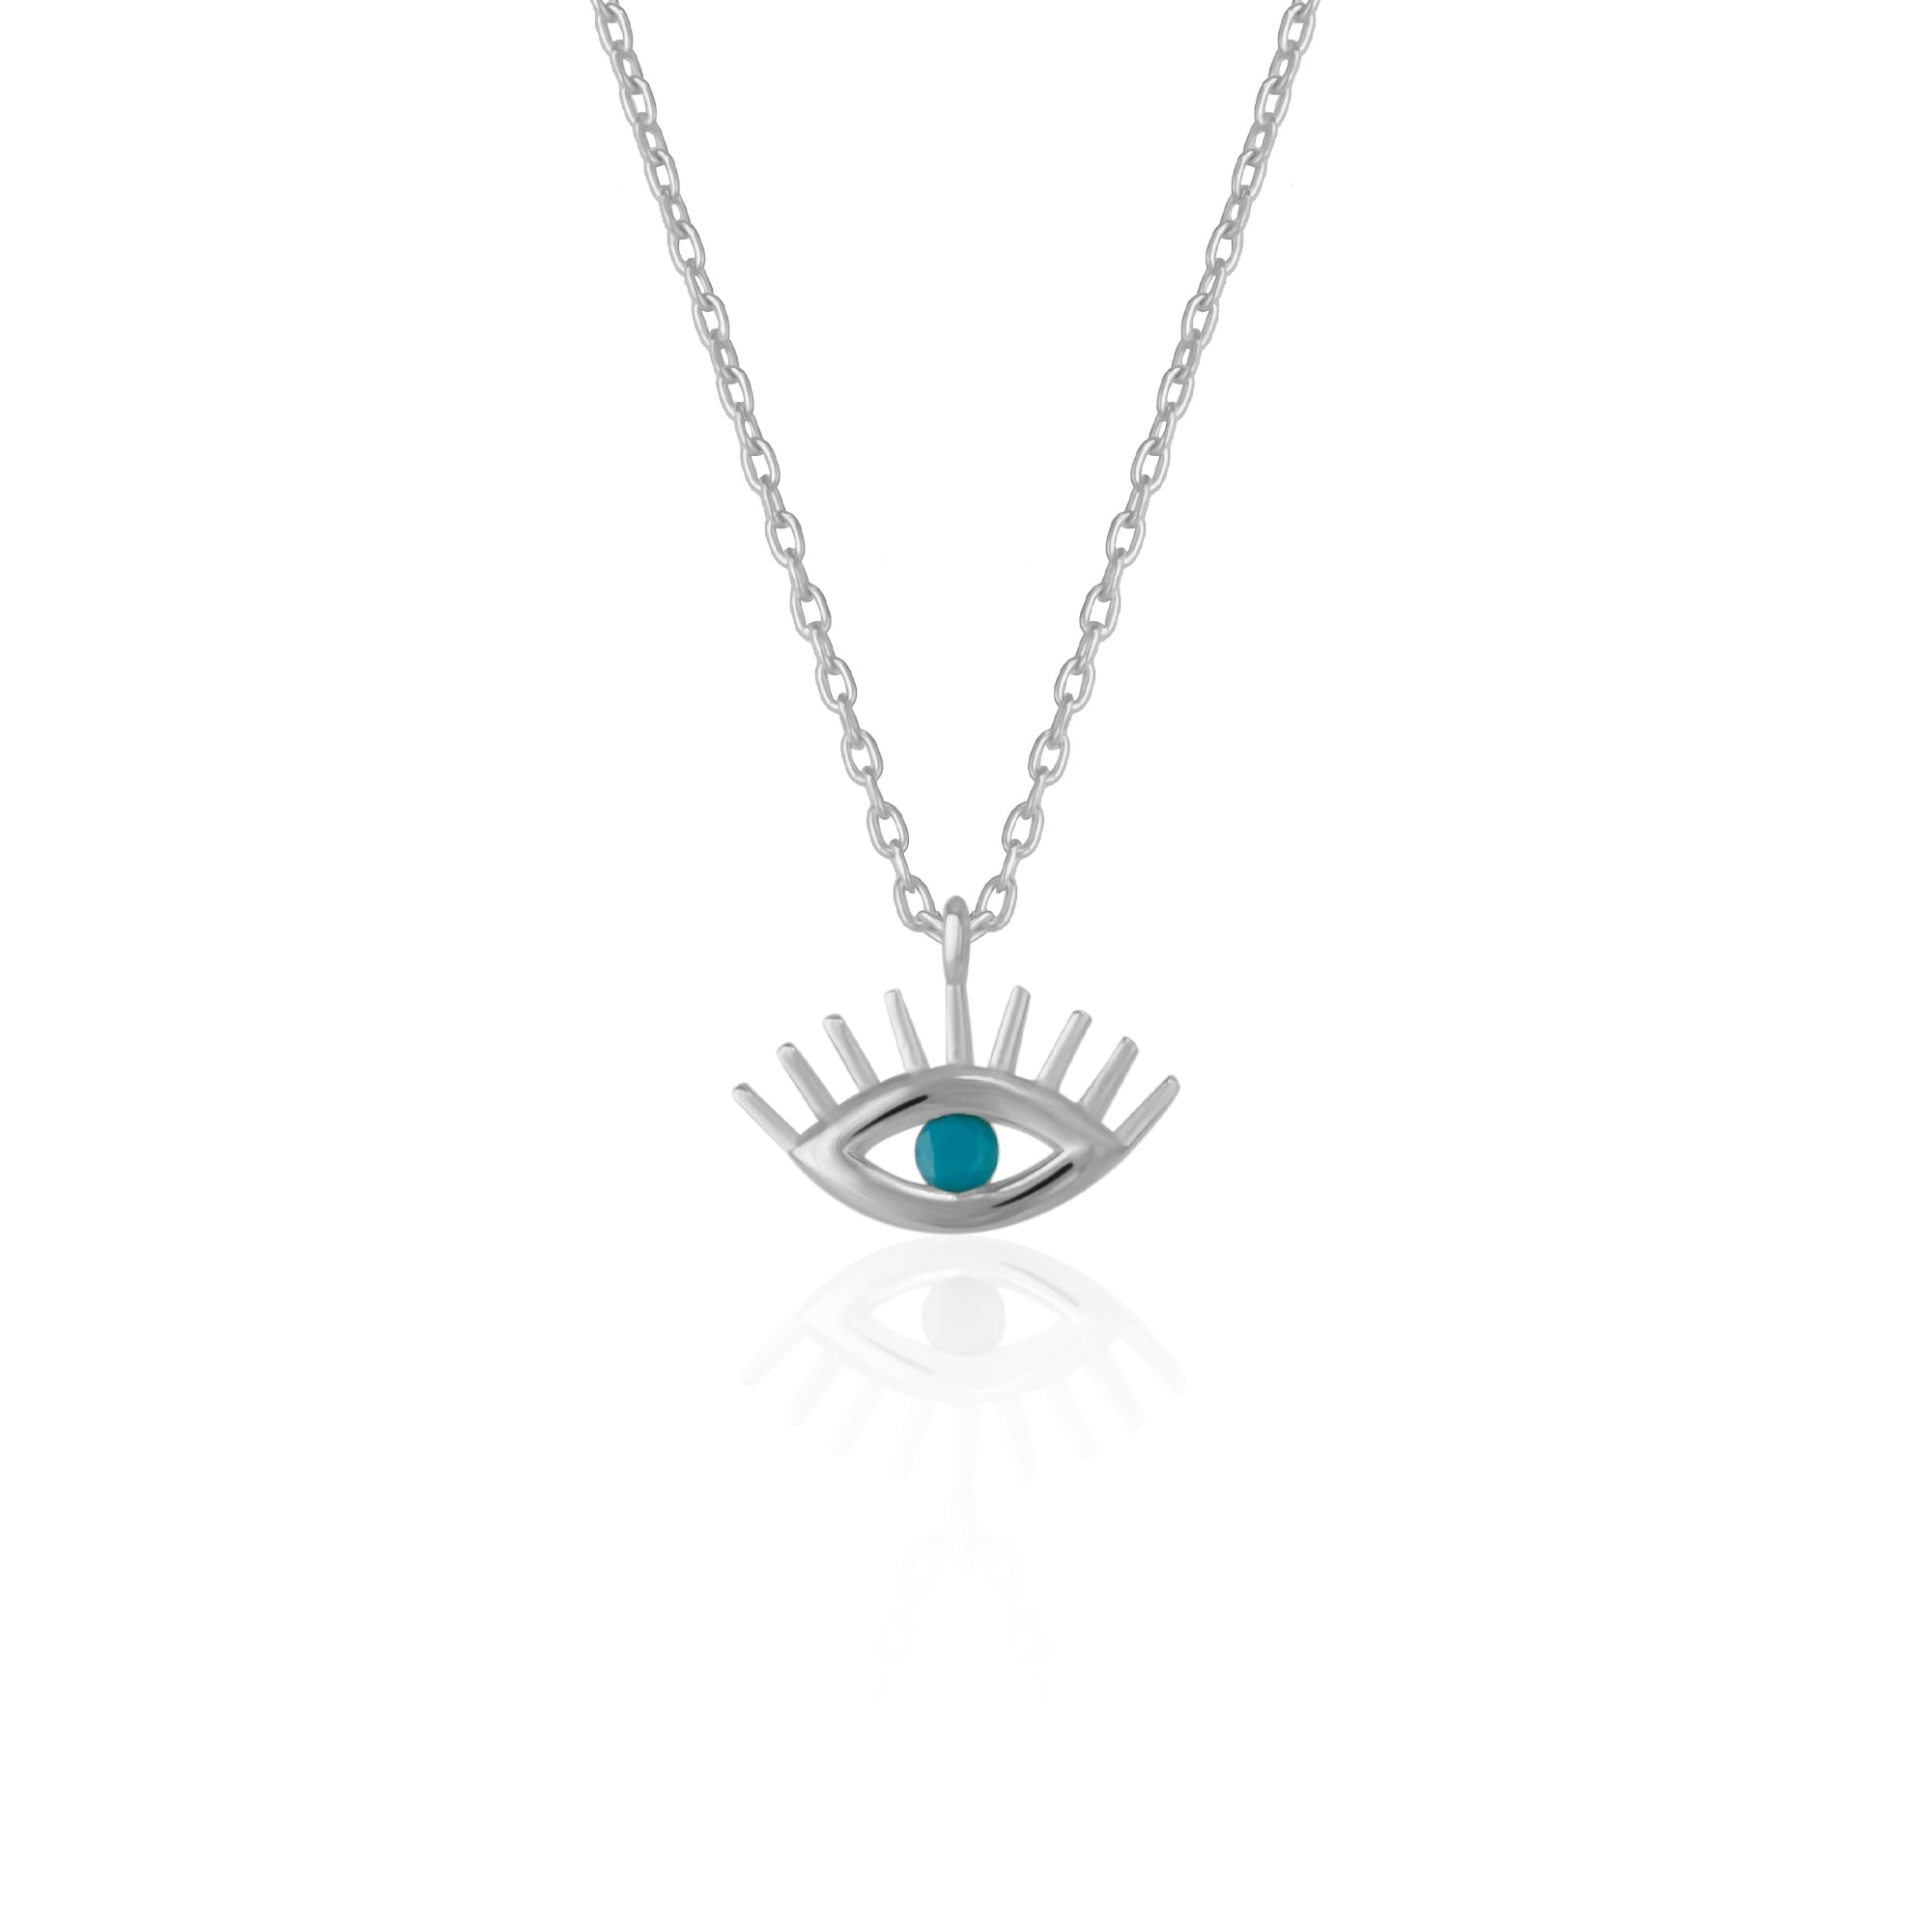 Turquoise Blue Eye Evil Eye Sterling Silver Necklace